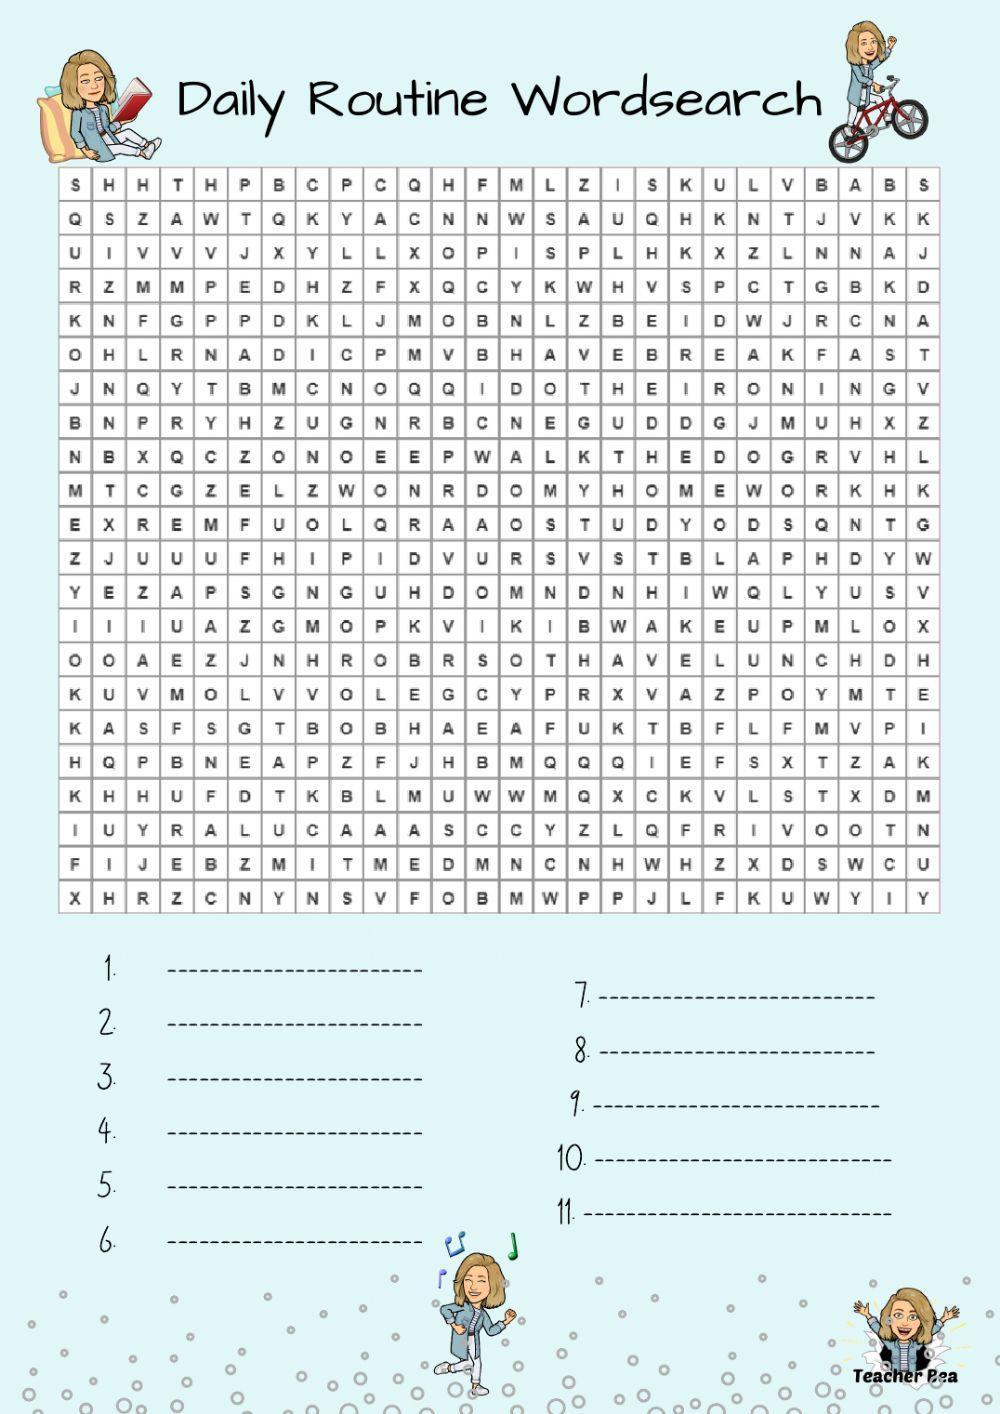 Daily Routine Wordsearch